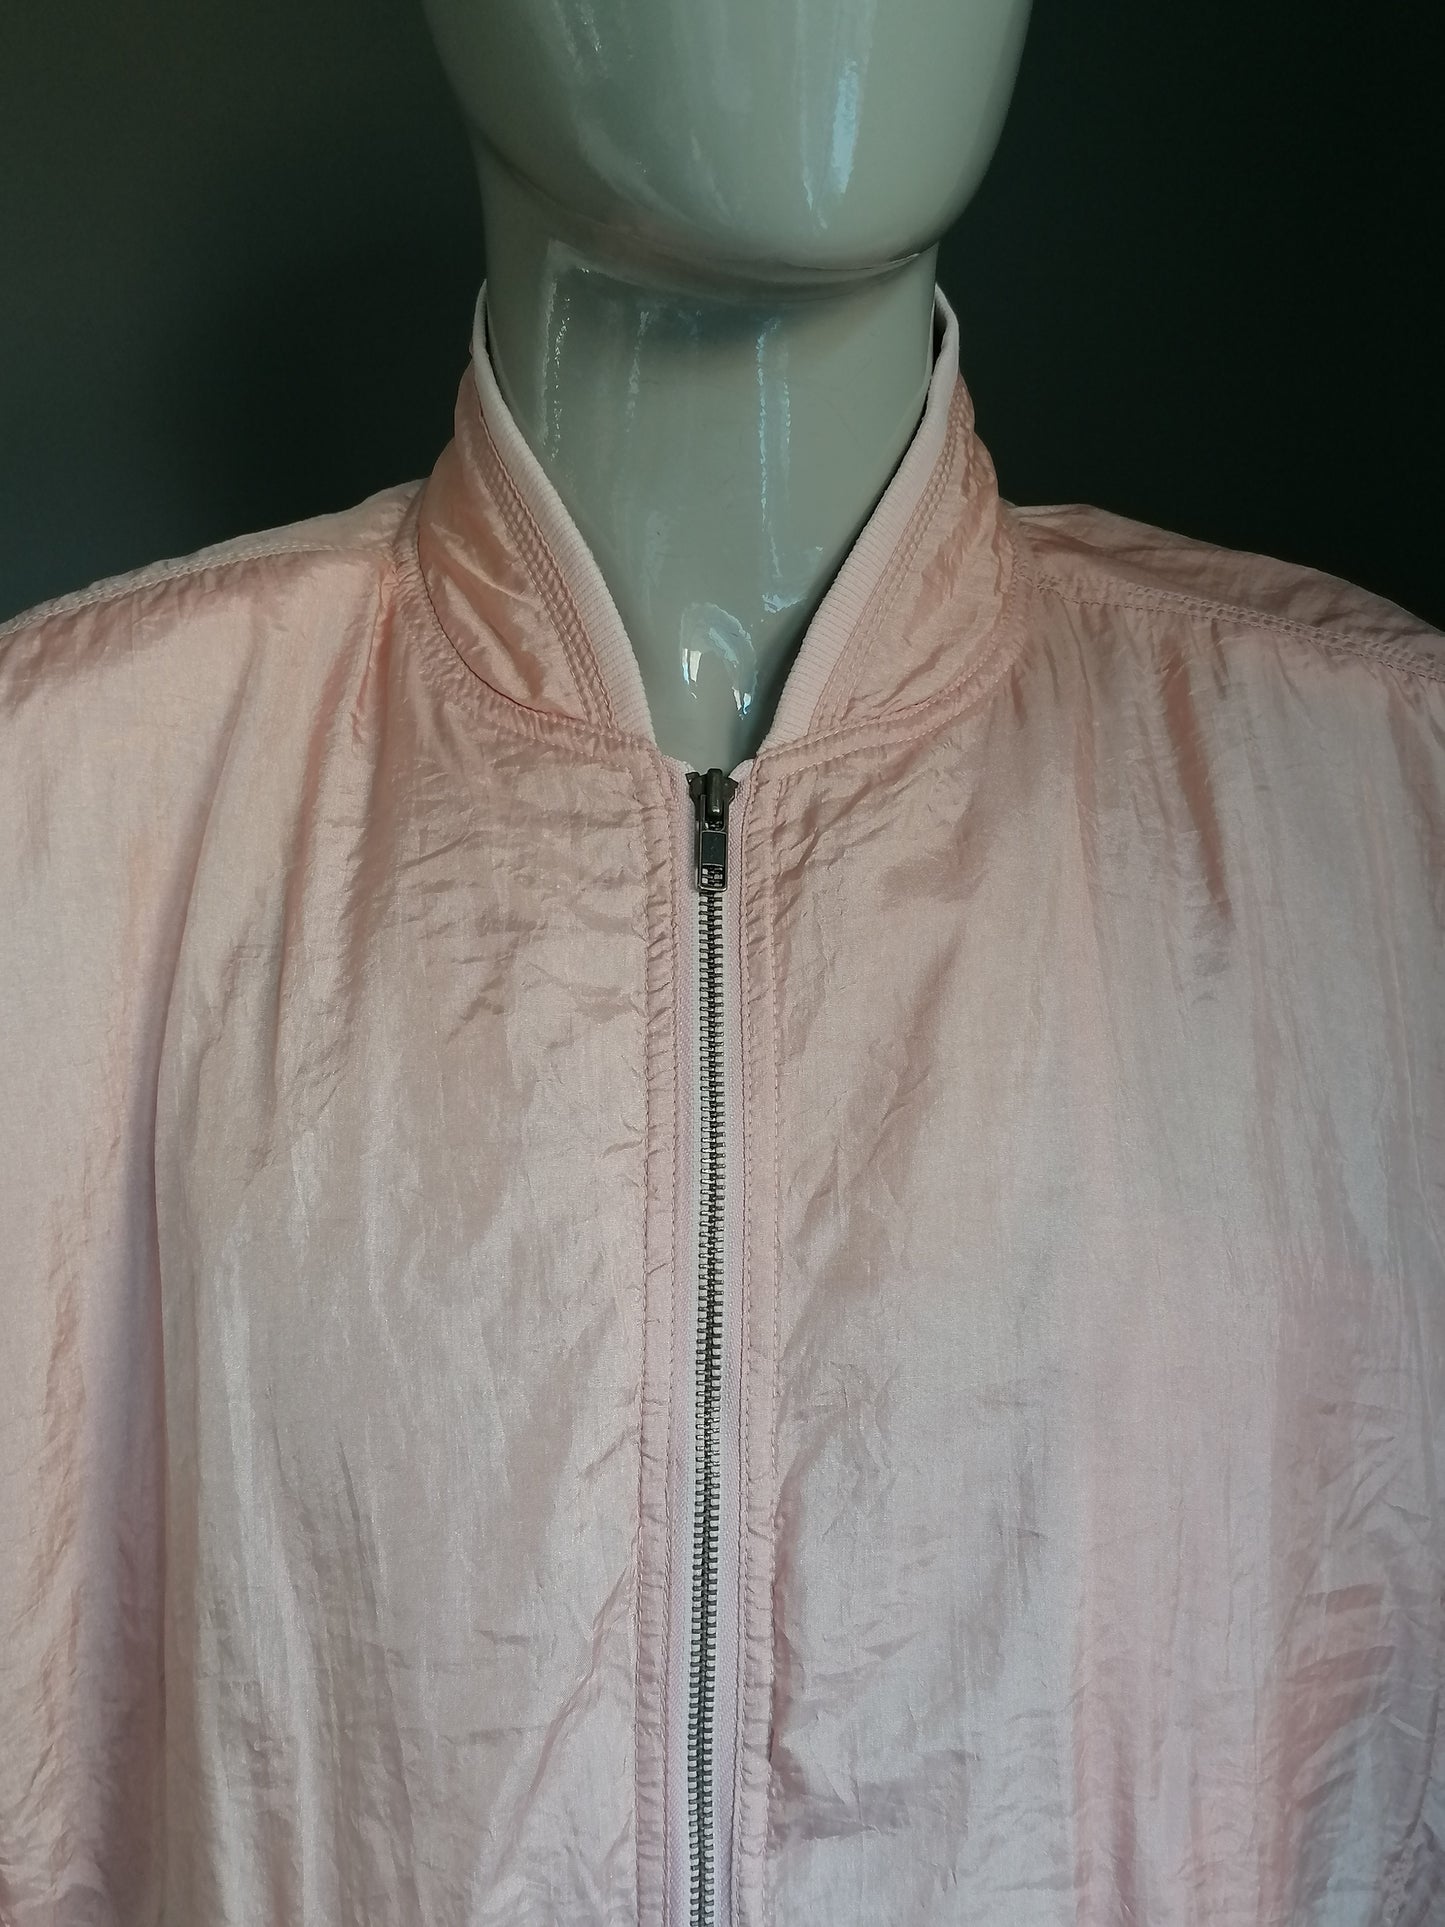 Vintage Central Park 80s-90's training jacket with shoulder fillings. Pink colored. Size XXL / 2XL.